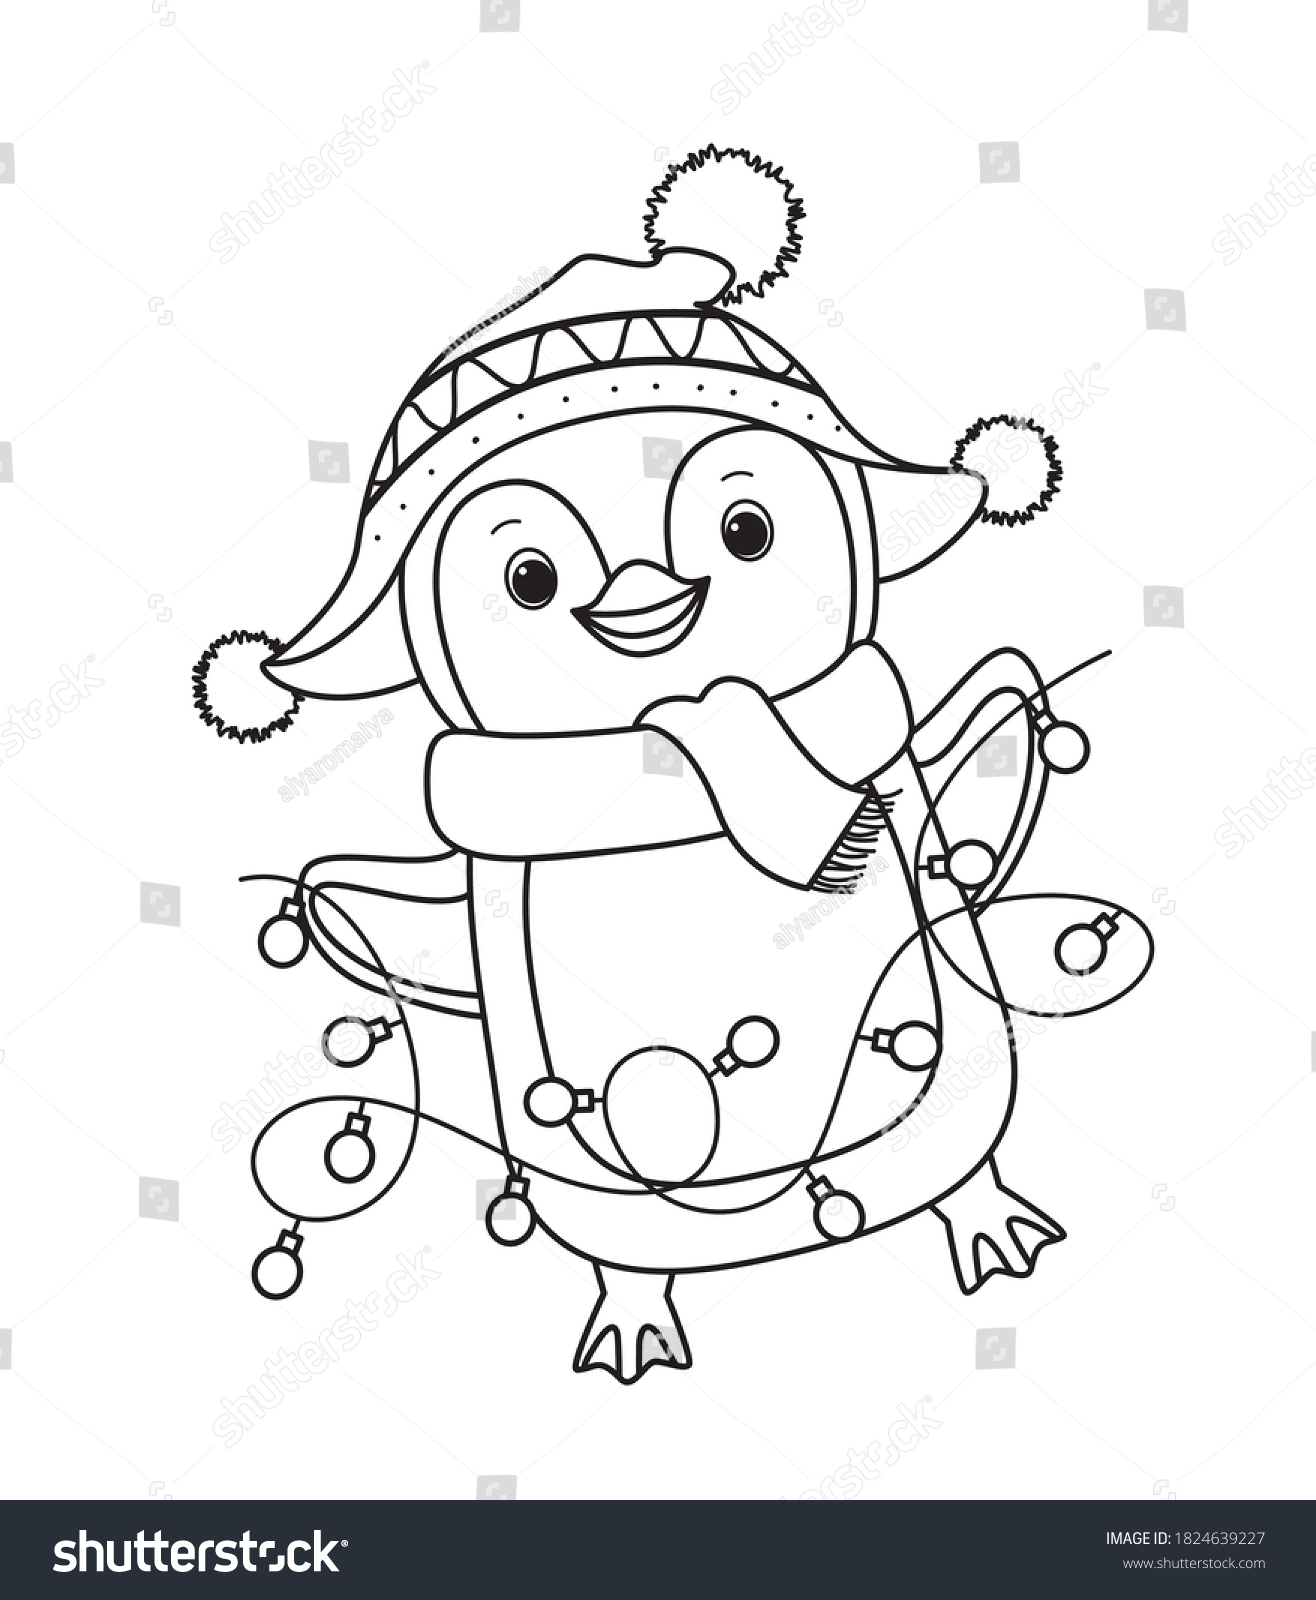 Printable christmas coloring pages images stock photos d objects vectors